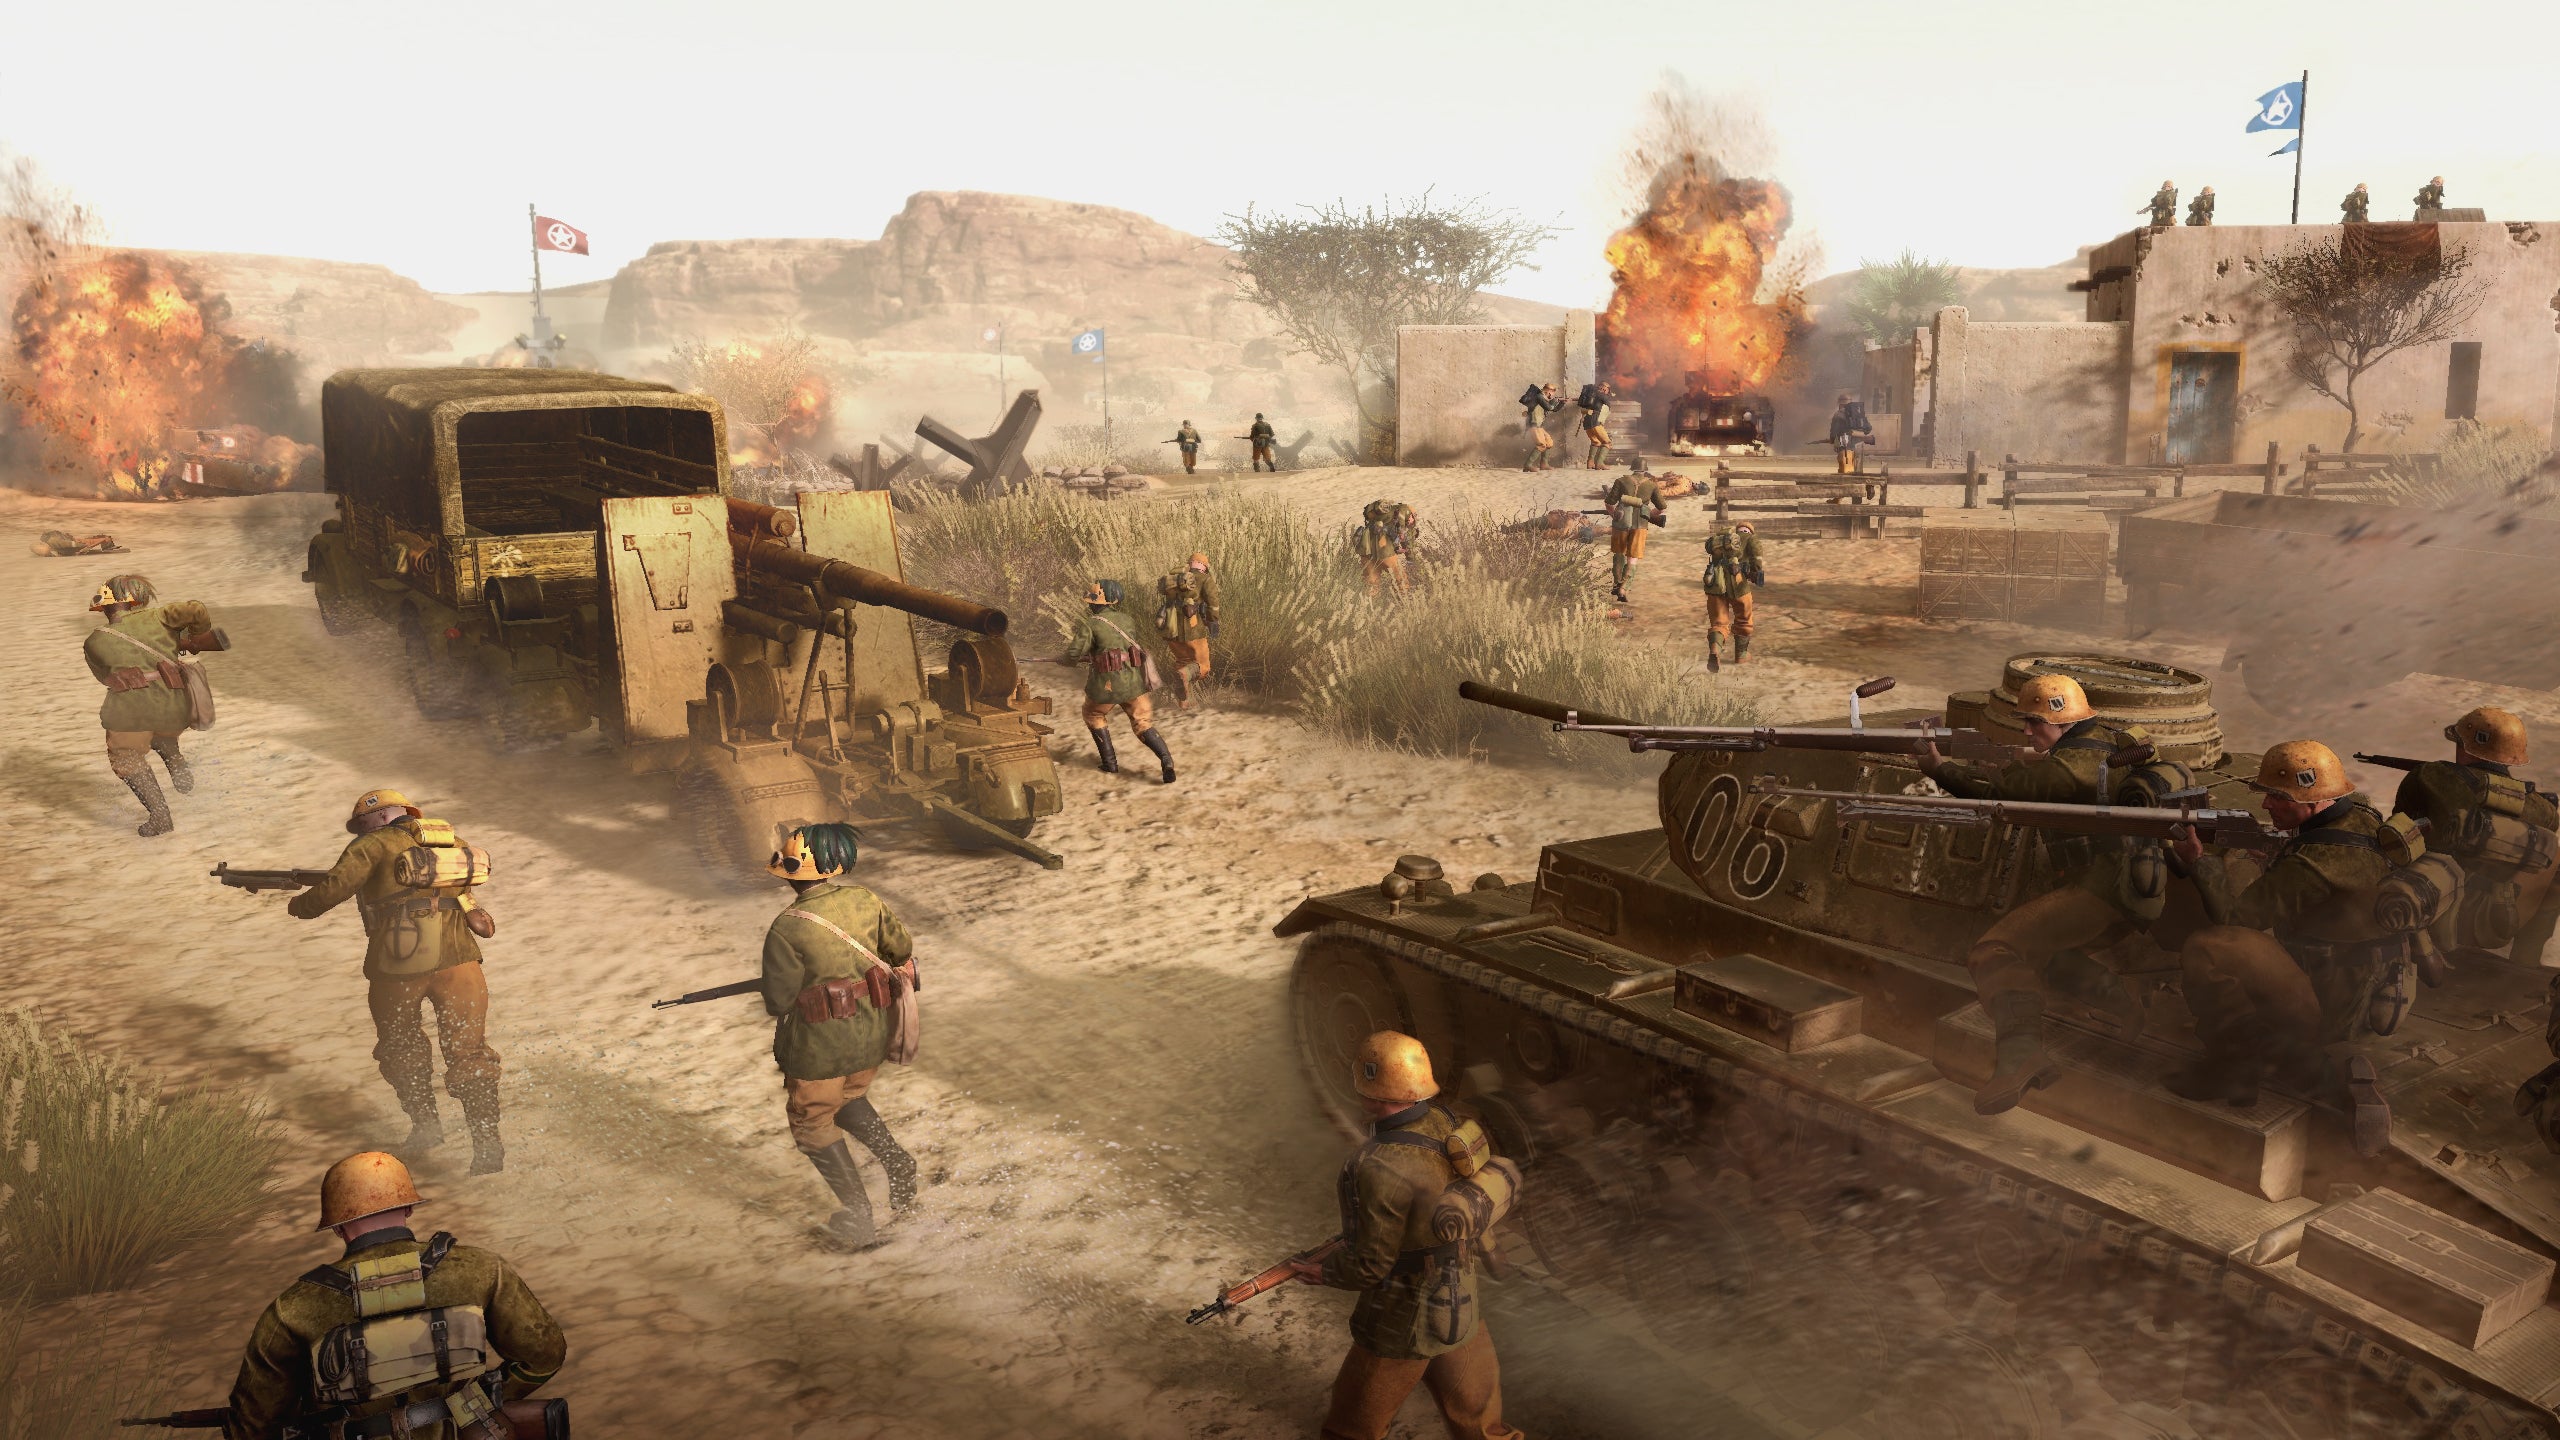 Company of Heroes 3 preview - Edited action shot of a tank rider in Tunisia